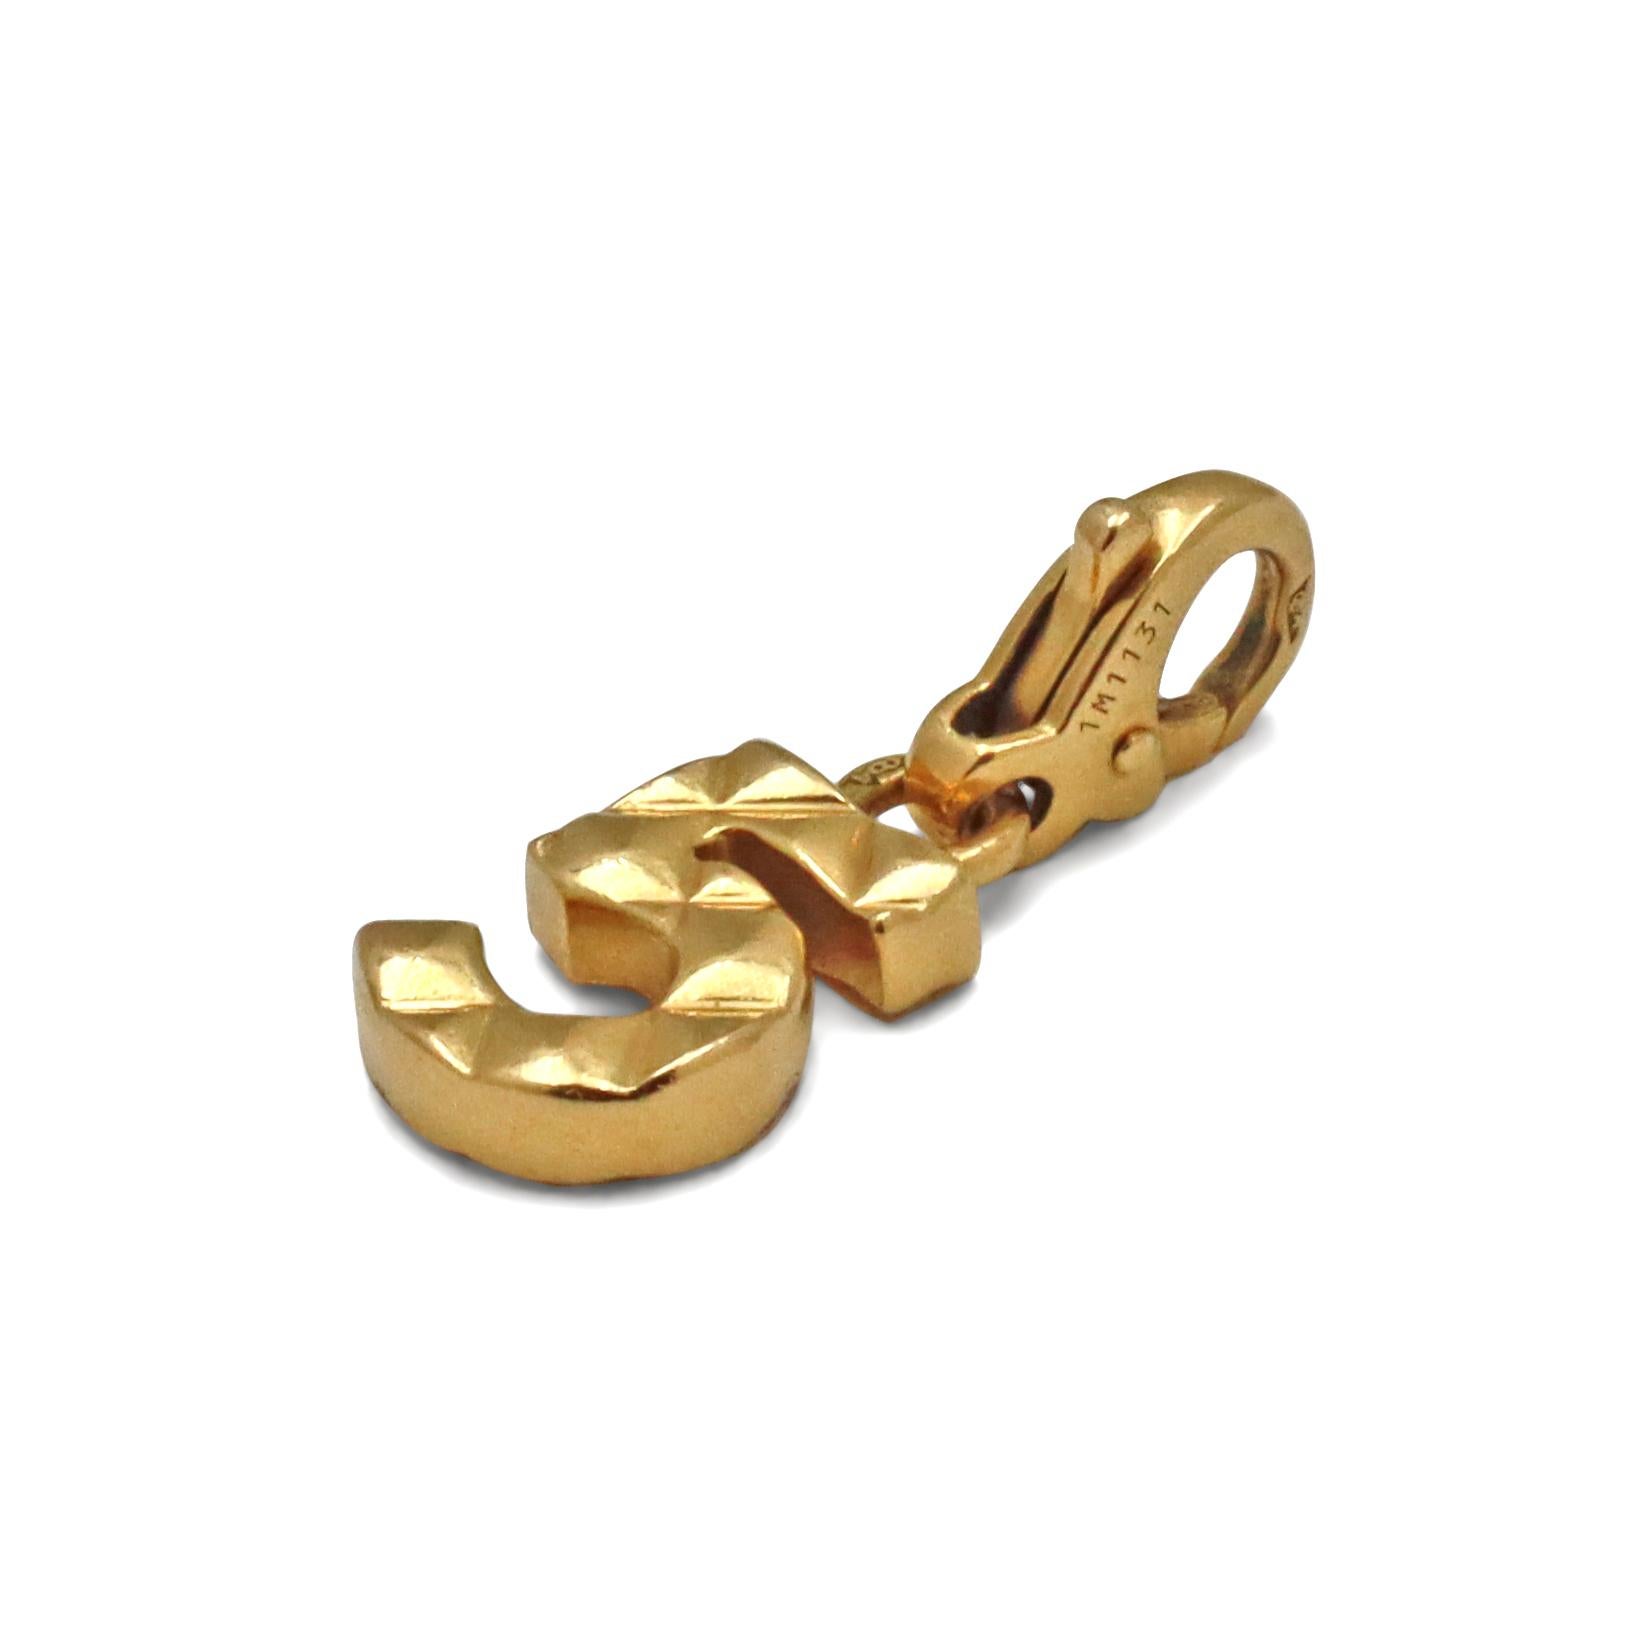 Authentic Chanel No 5 charm crafted in 18 karat yellow gold. Inspired by Chanel's famous No 5 L'Eau perfume. The charm measures 21mm in length and 8mm in width. Signed Chanel, 750, with serial number. The charm is not presented with the original box